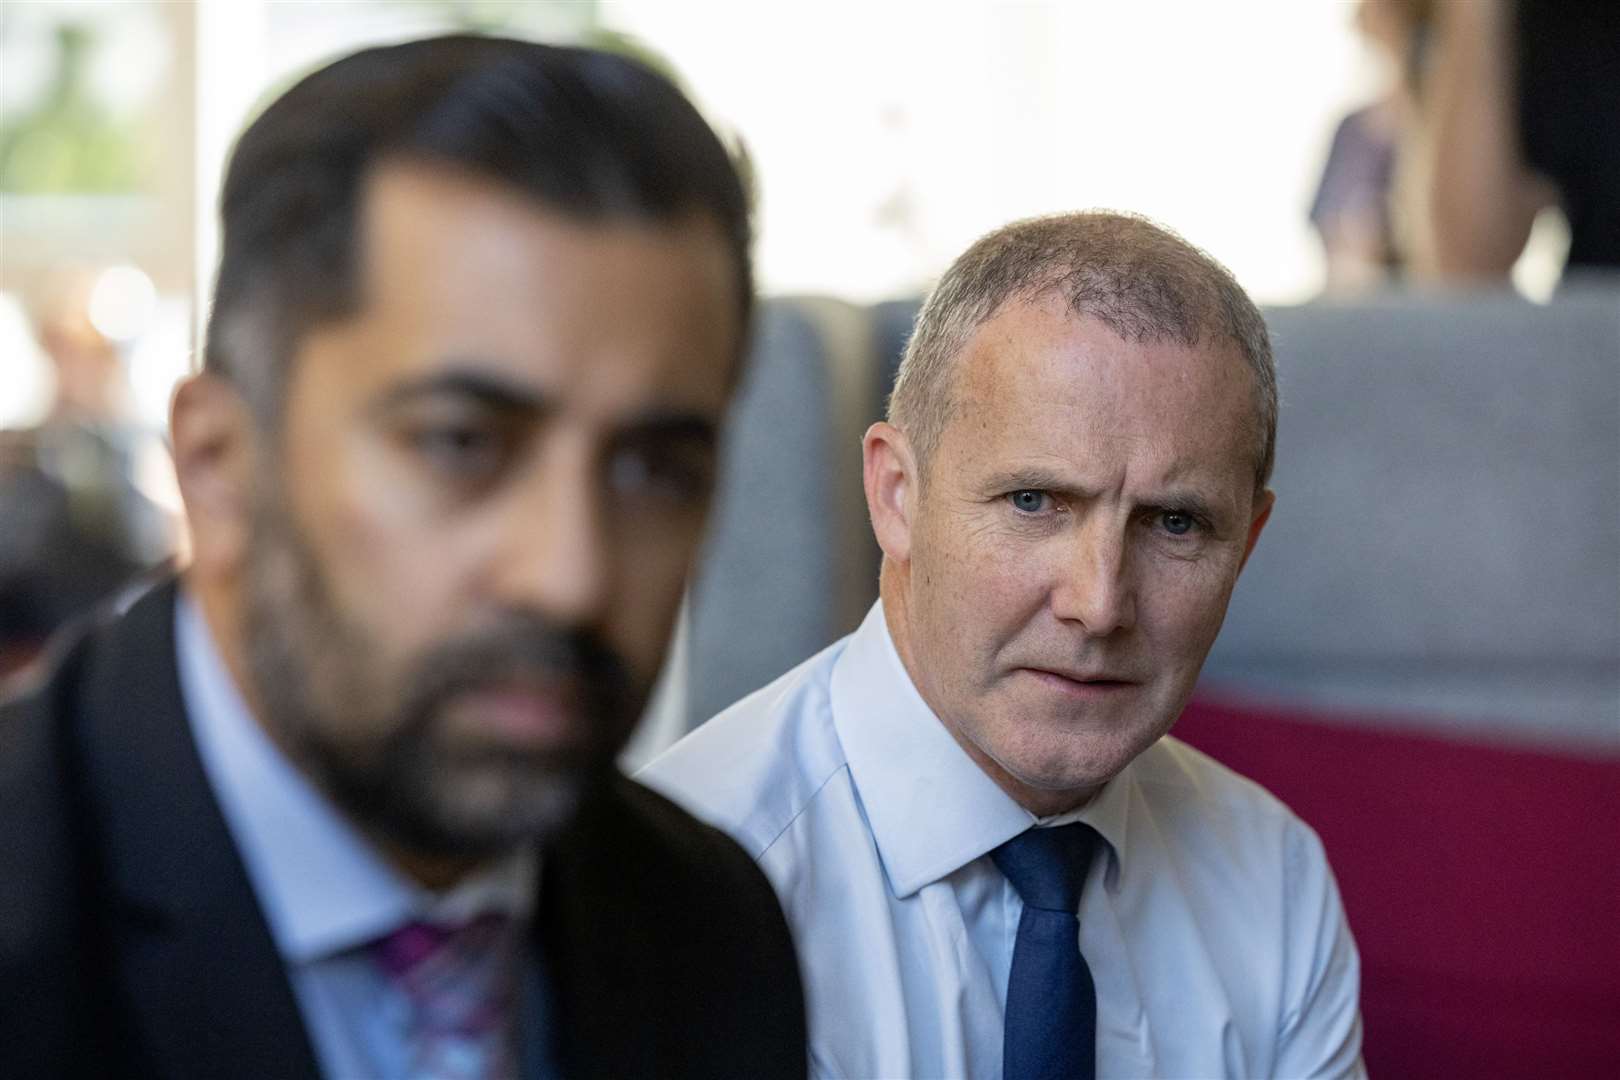 Michael Matheson, right, was supported by First Minister Humza Yousaf to continue in the role when the charges first emerged (PA)